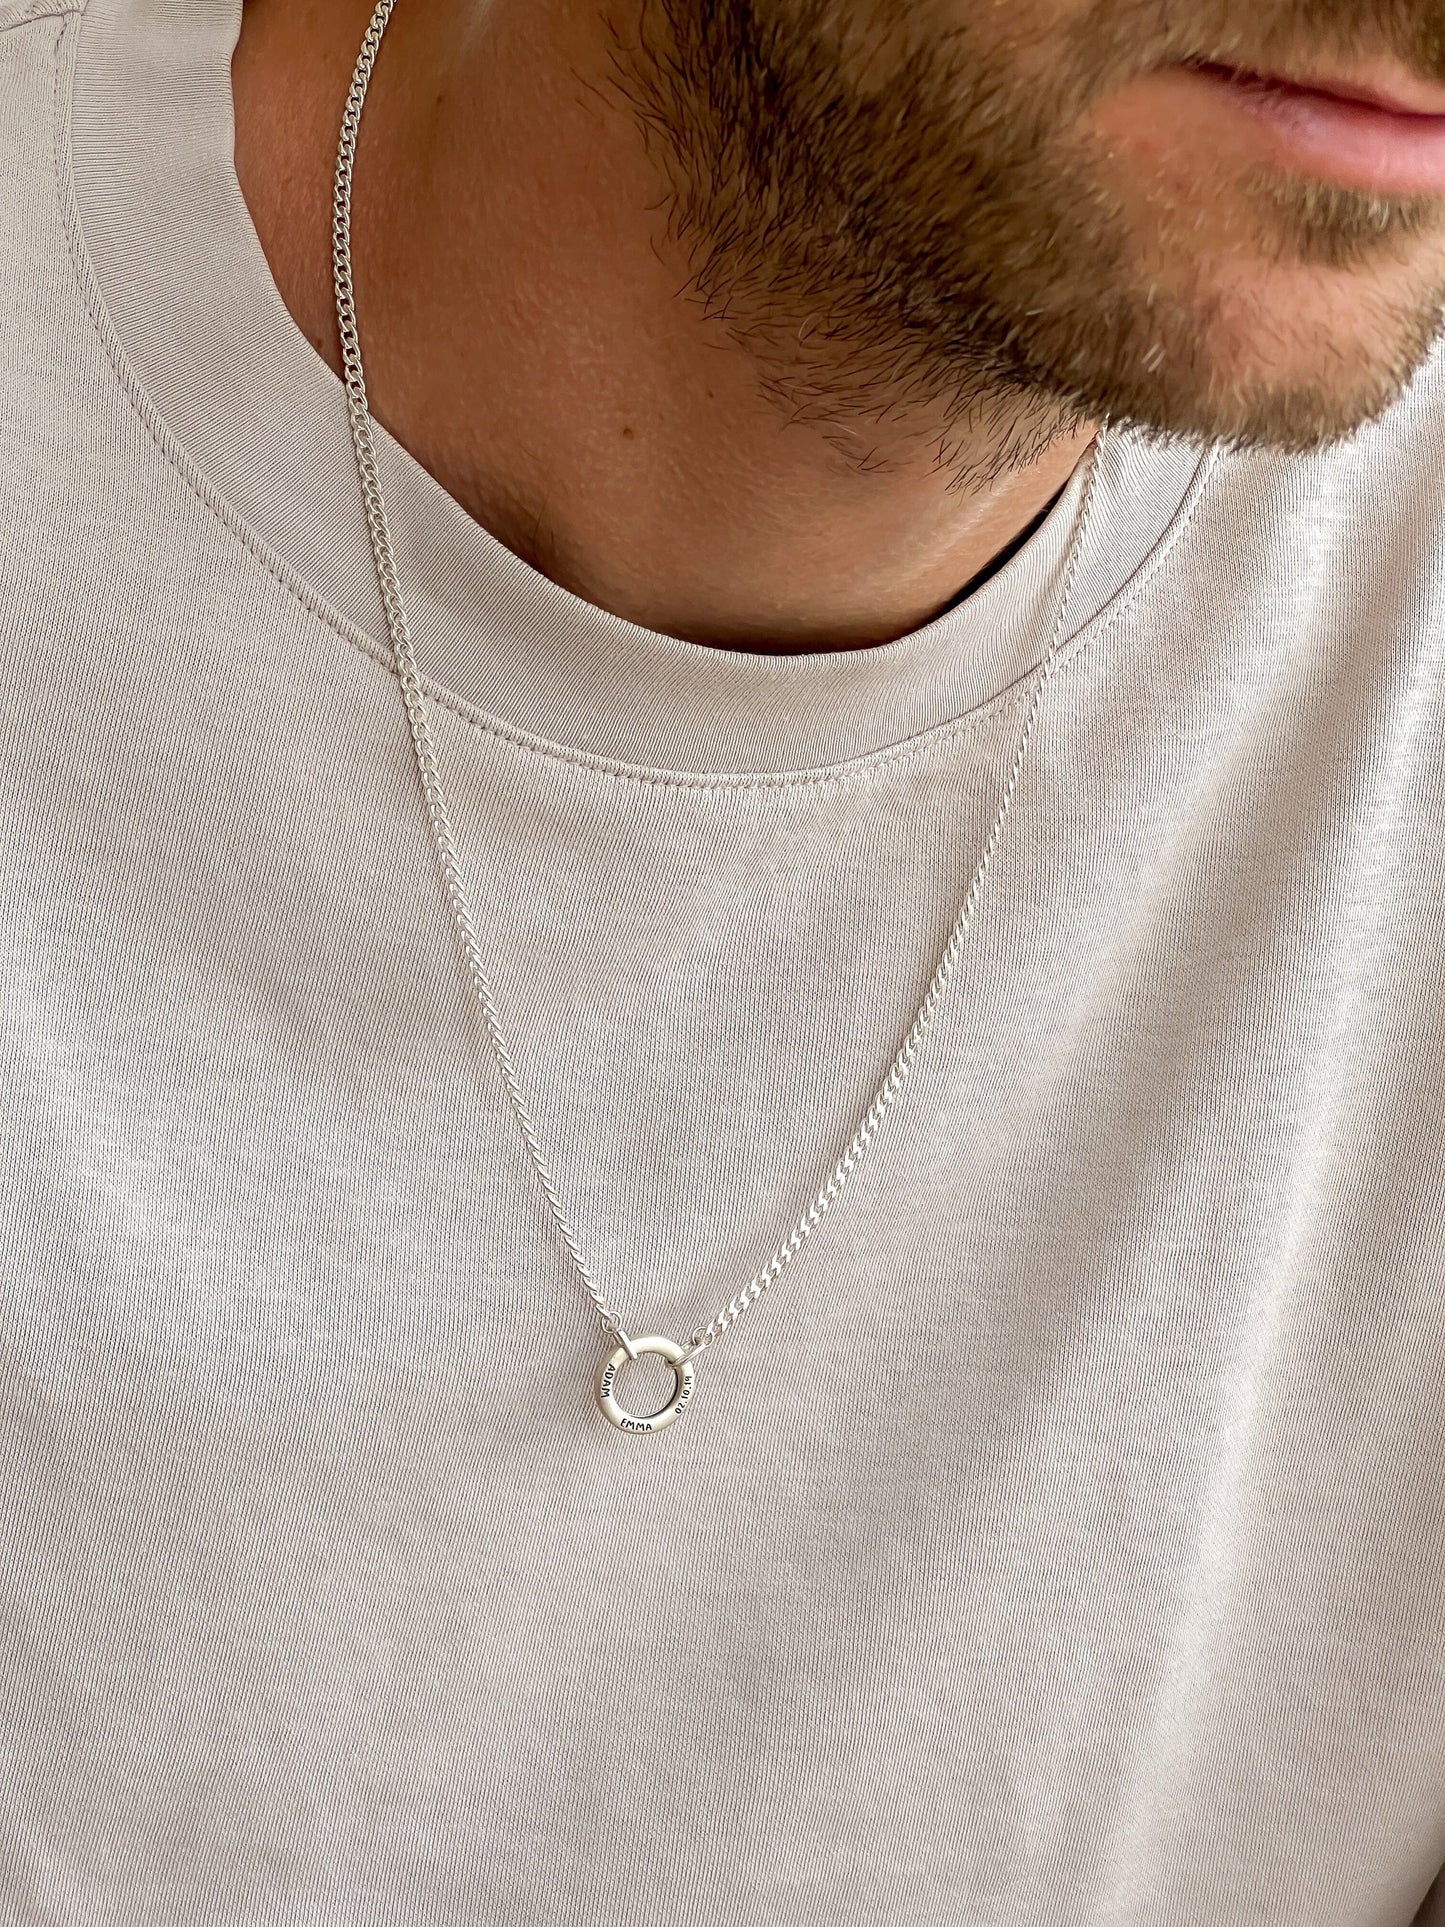 Collier Homme My Family- Argent 925 Necklaces magal-dev 